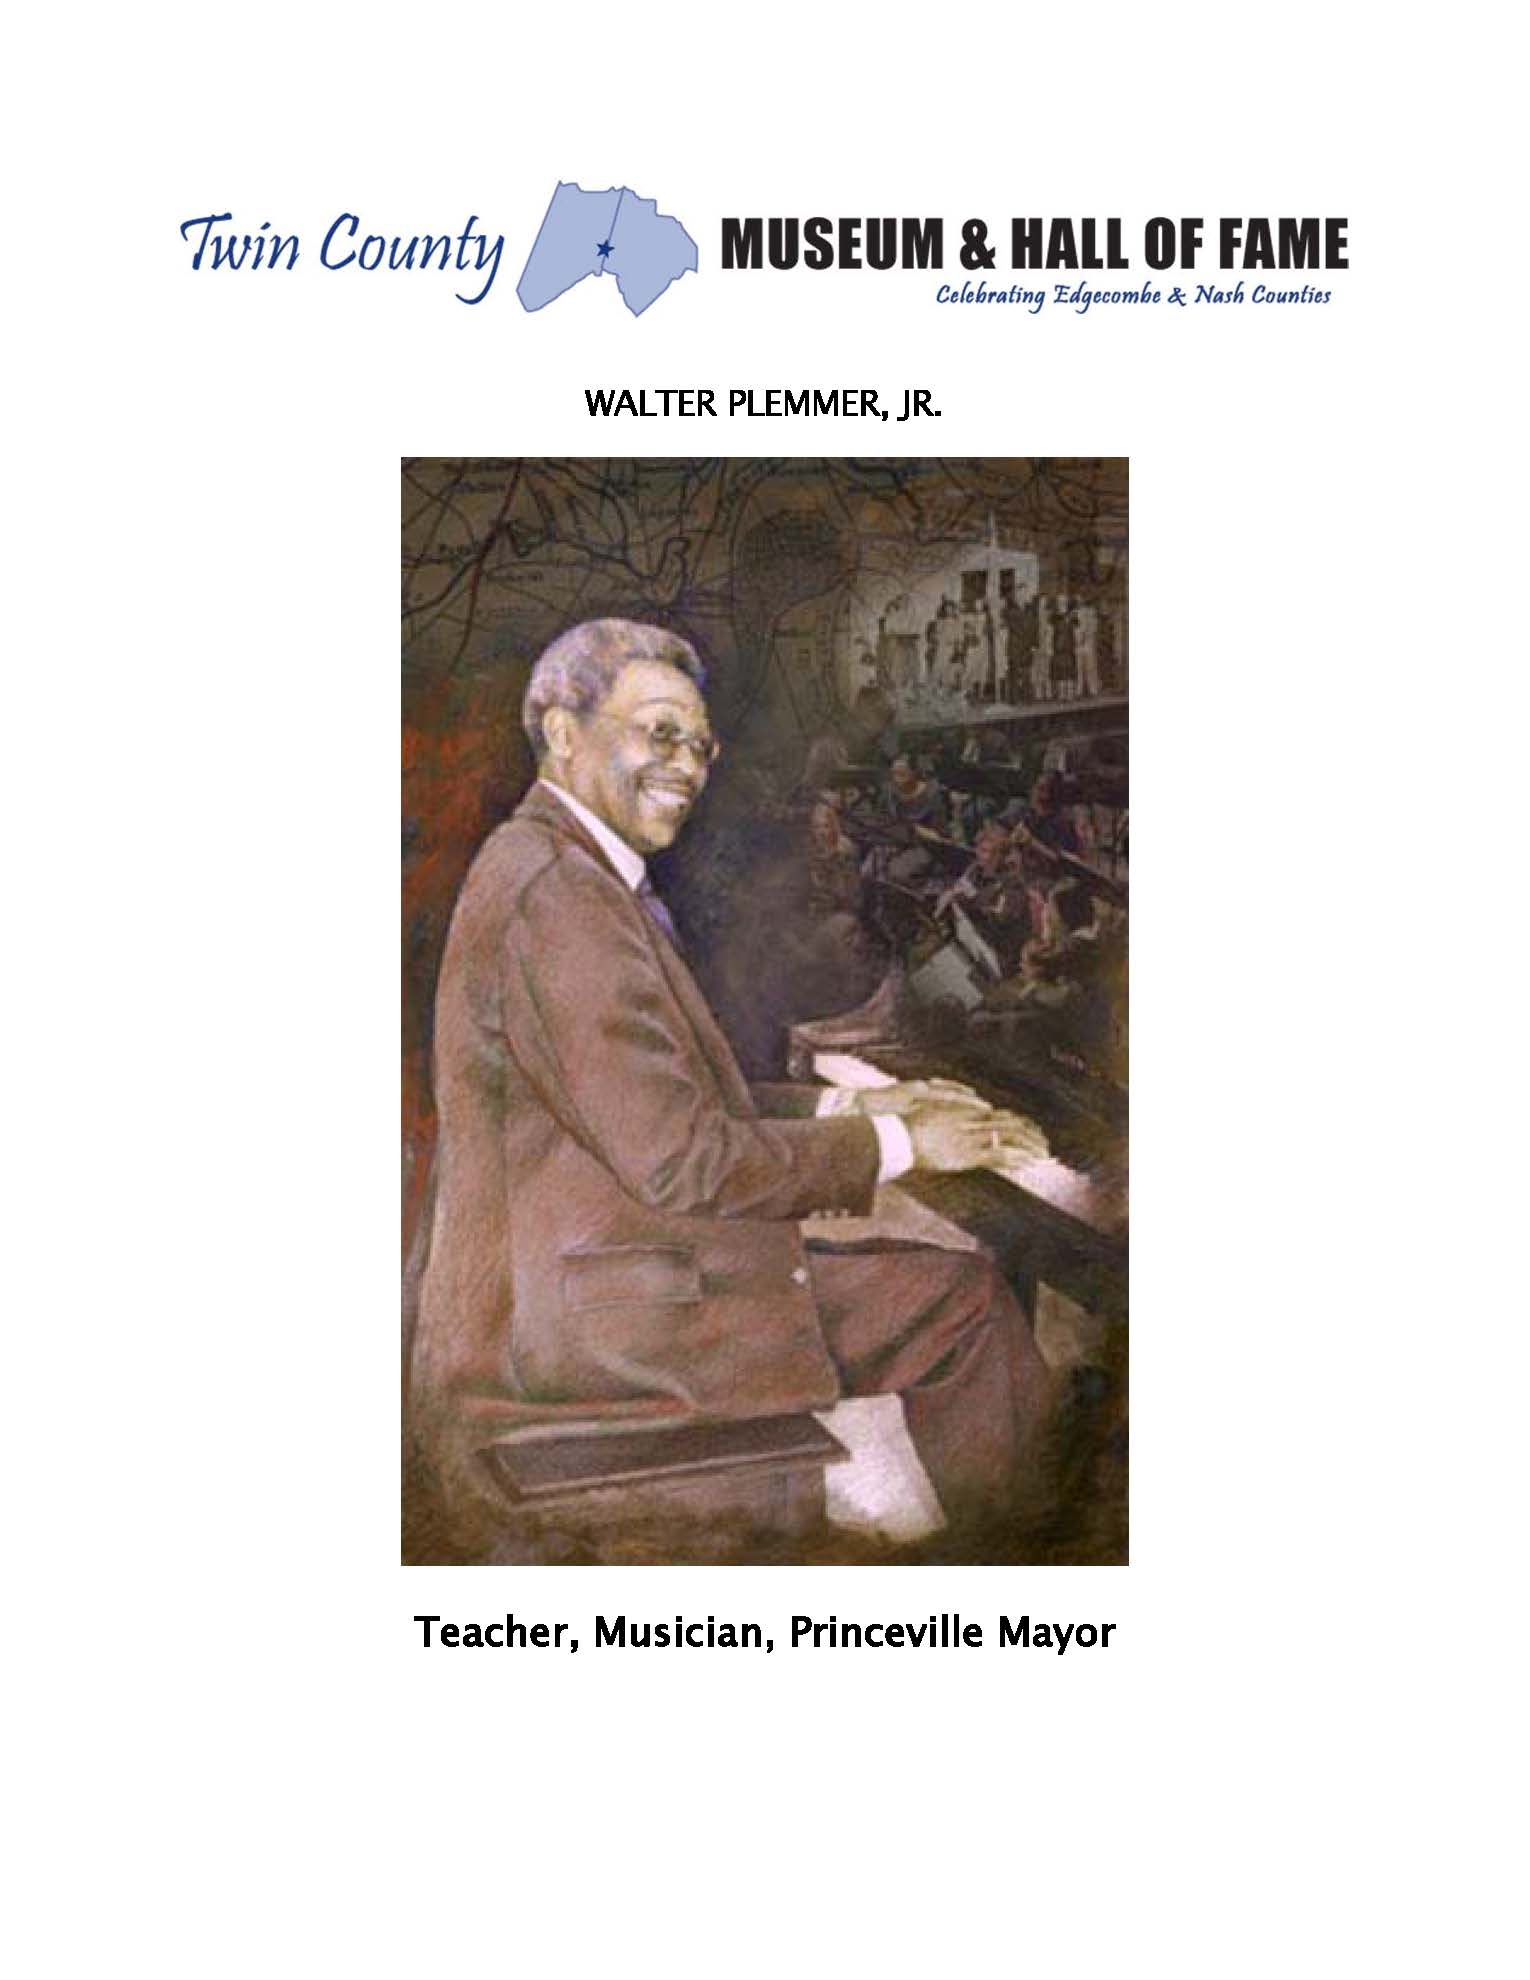 ARTICLE FROM WEBSITE OF TWIN COUNTY MUSEUM HALL OF FAME